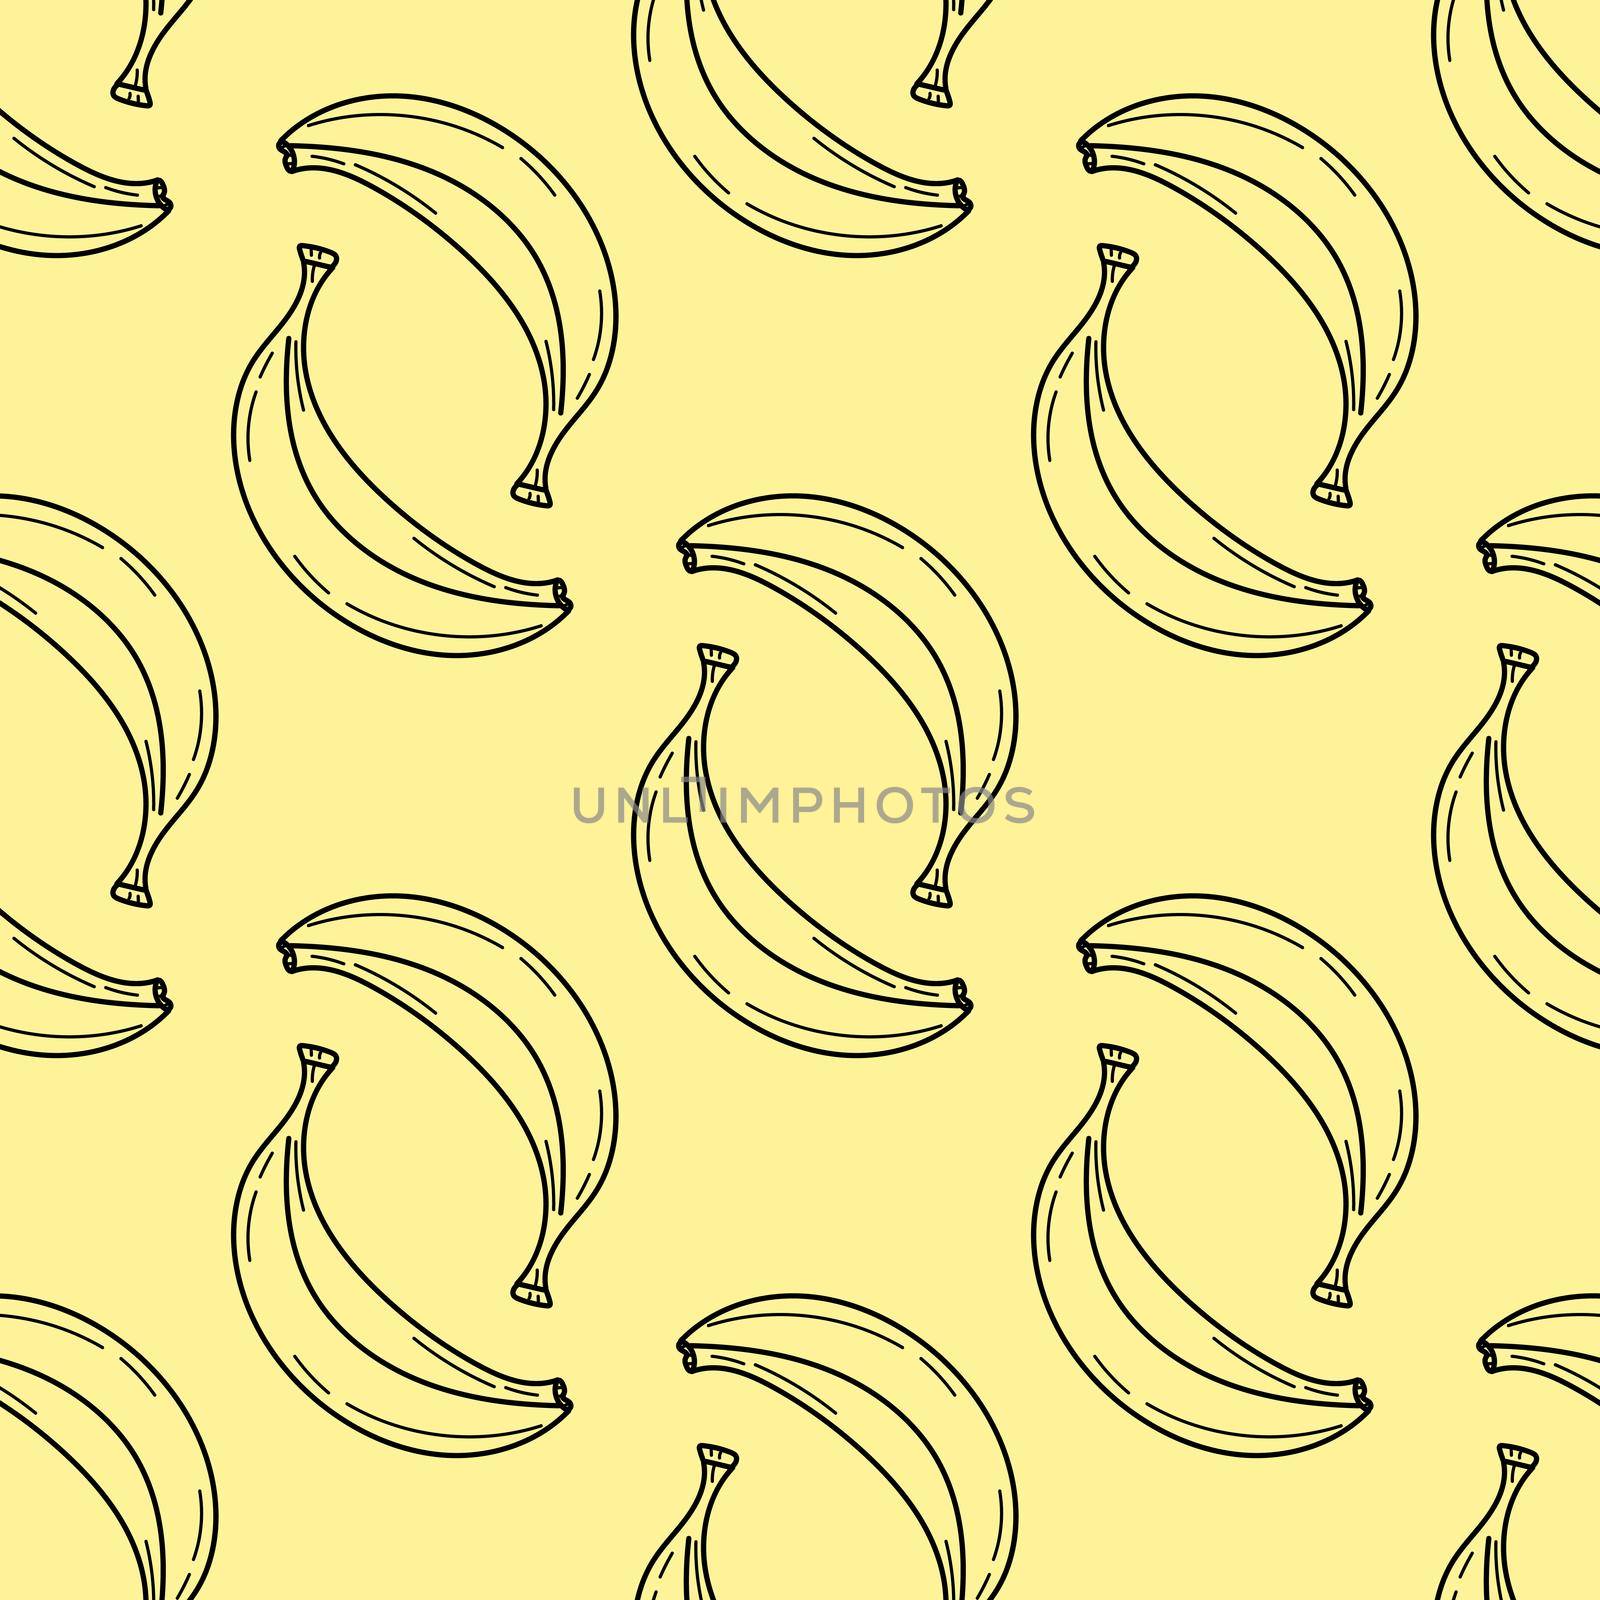 Seamless stylish pattern with hand drawn bananas. Cartoon bright background for packaging, menu, textiles. Colorful wallpaper vector